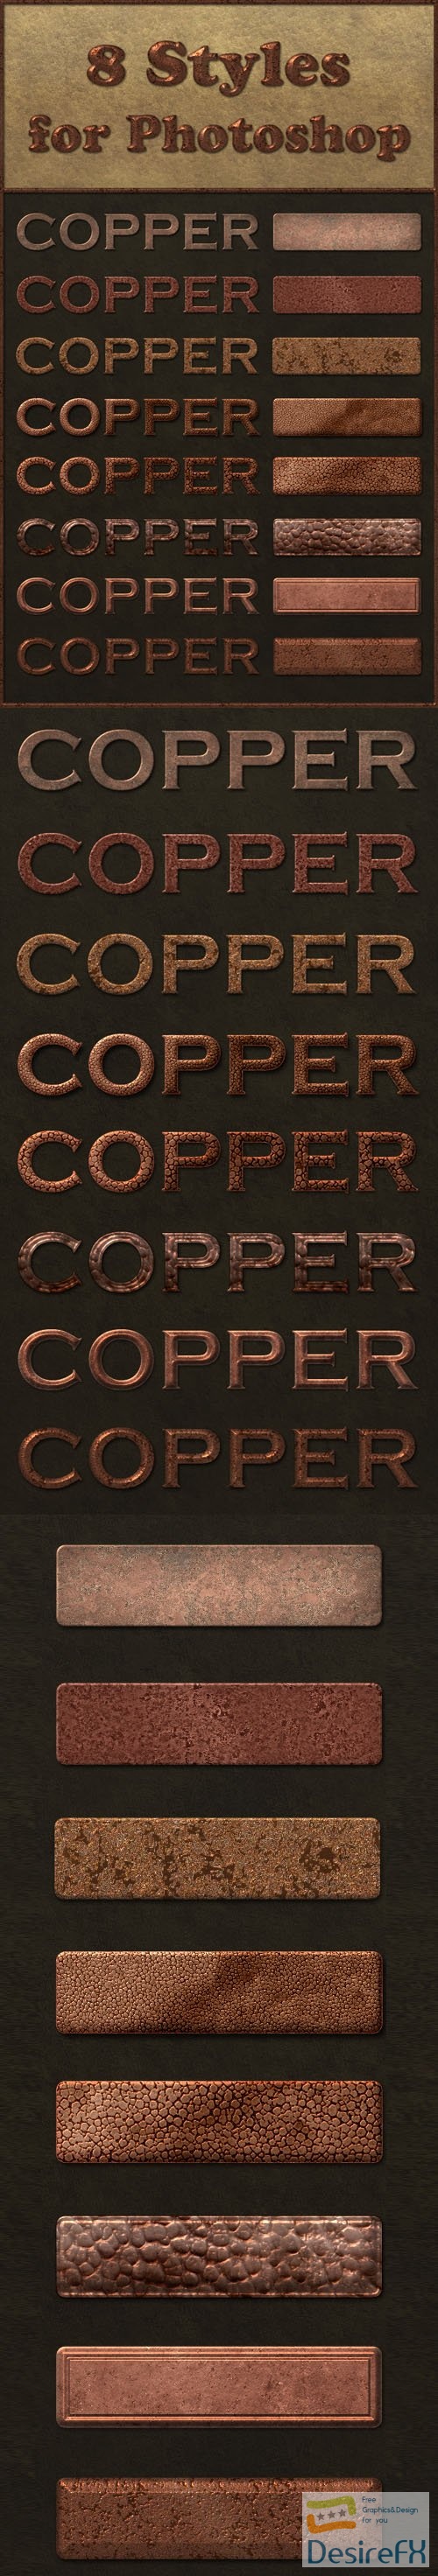 Antique Copper Styles for Photoshop